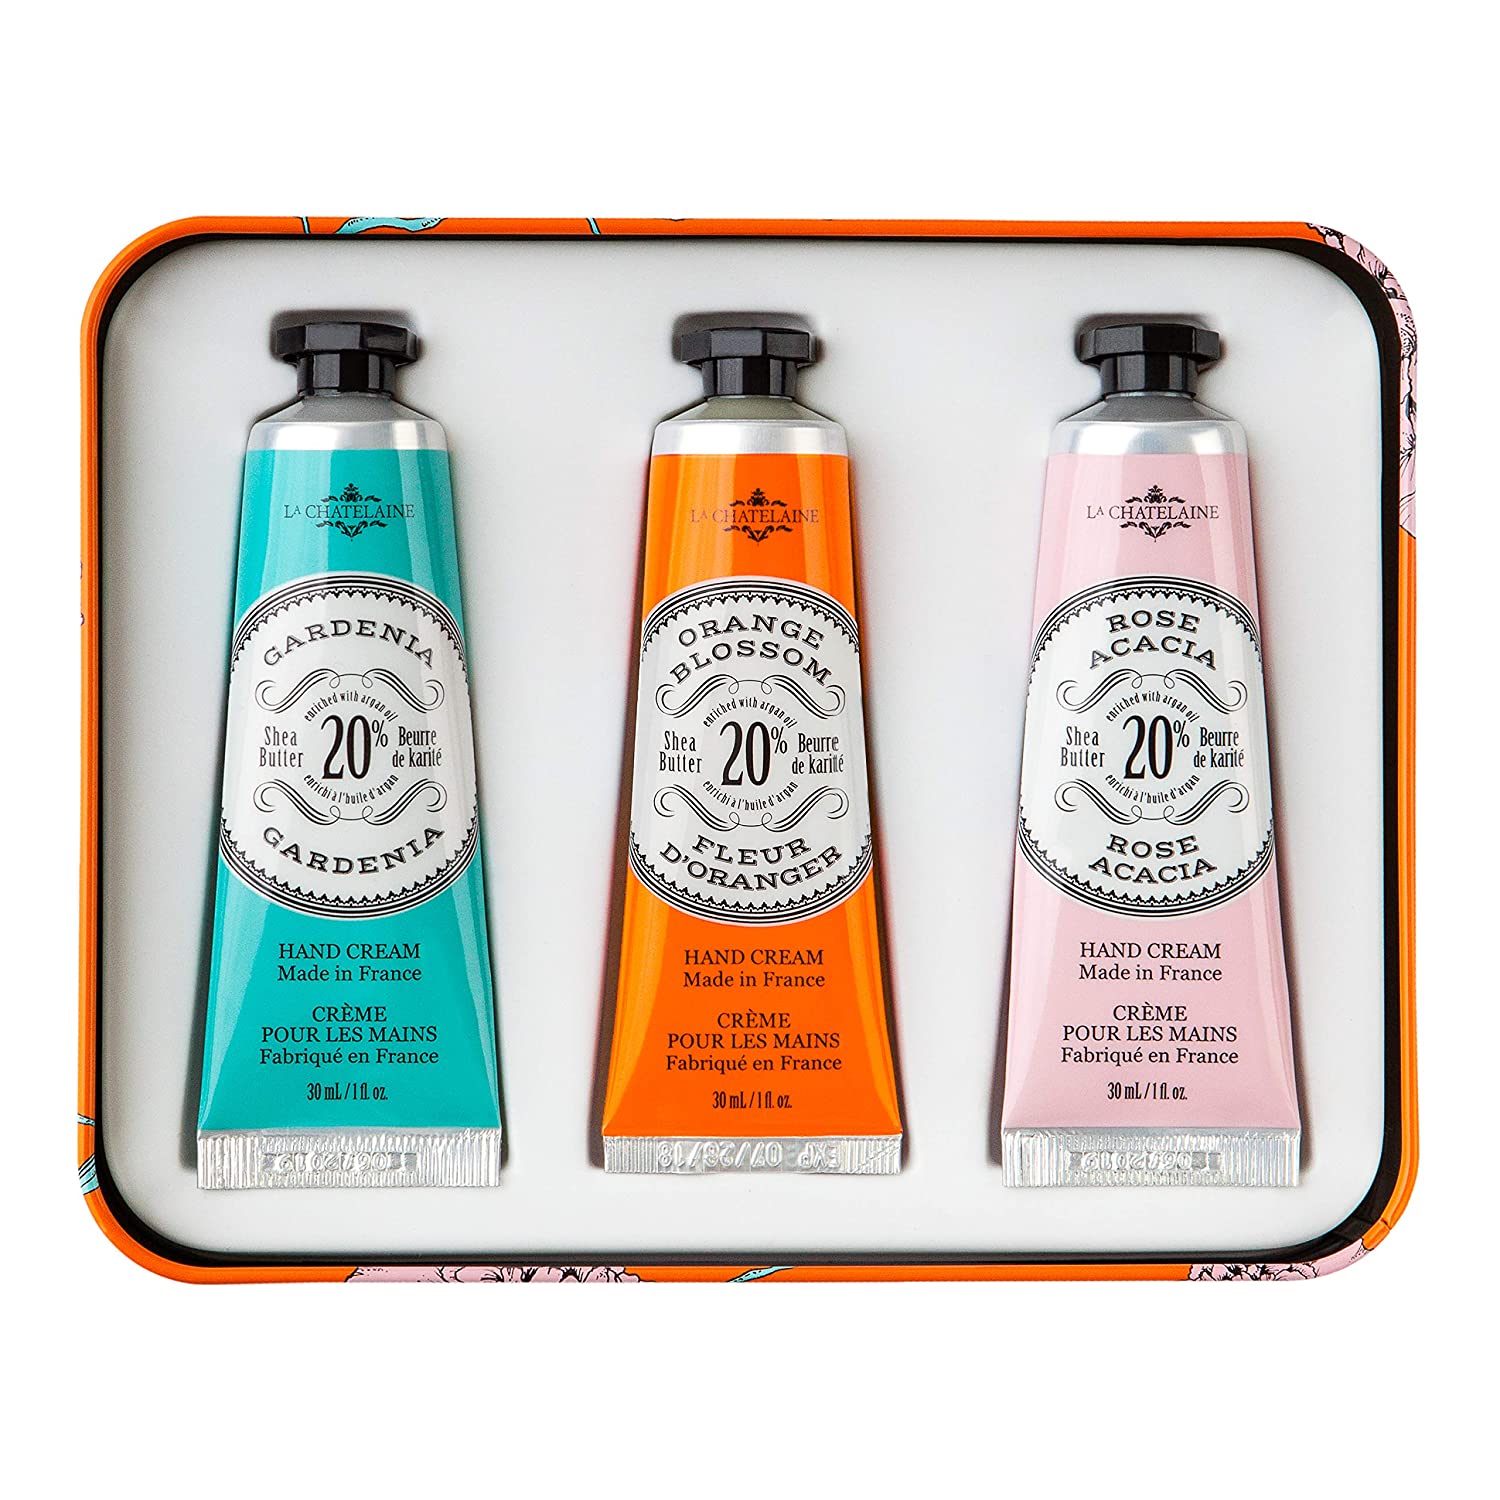 La Chatelaine Hand Cream Trio Collection, featuring Gardenia, Orange Blossom, and Rose Acacia - The Finished Room